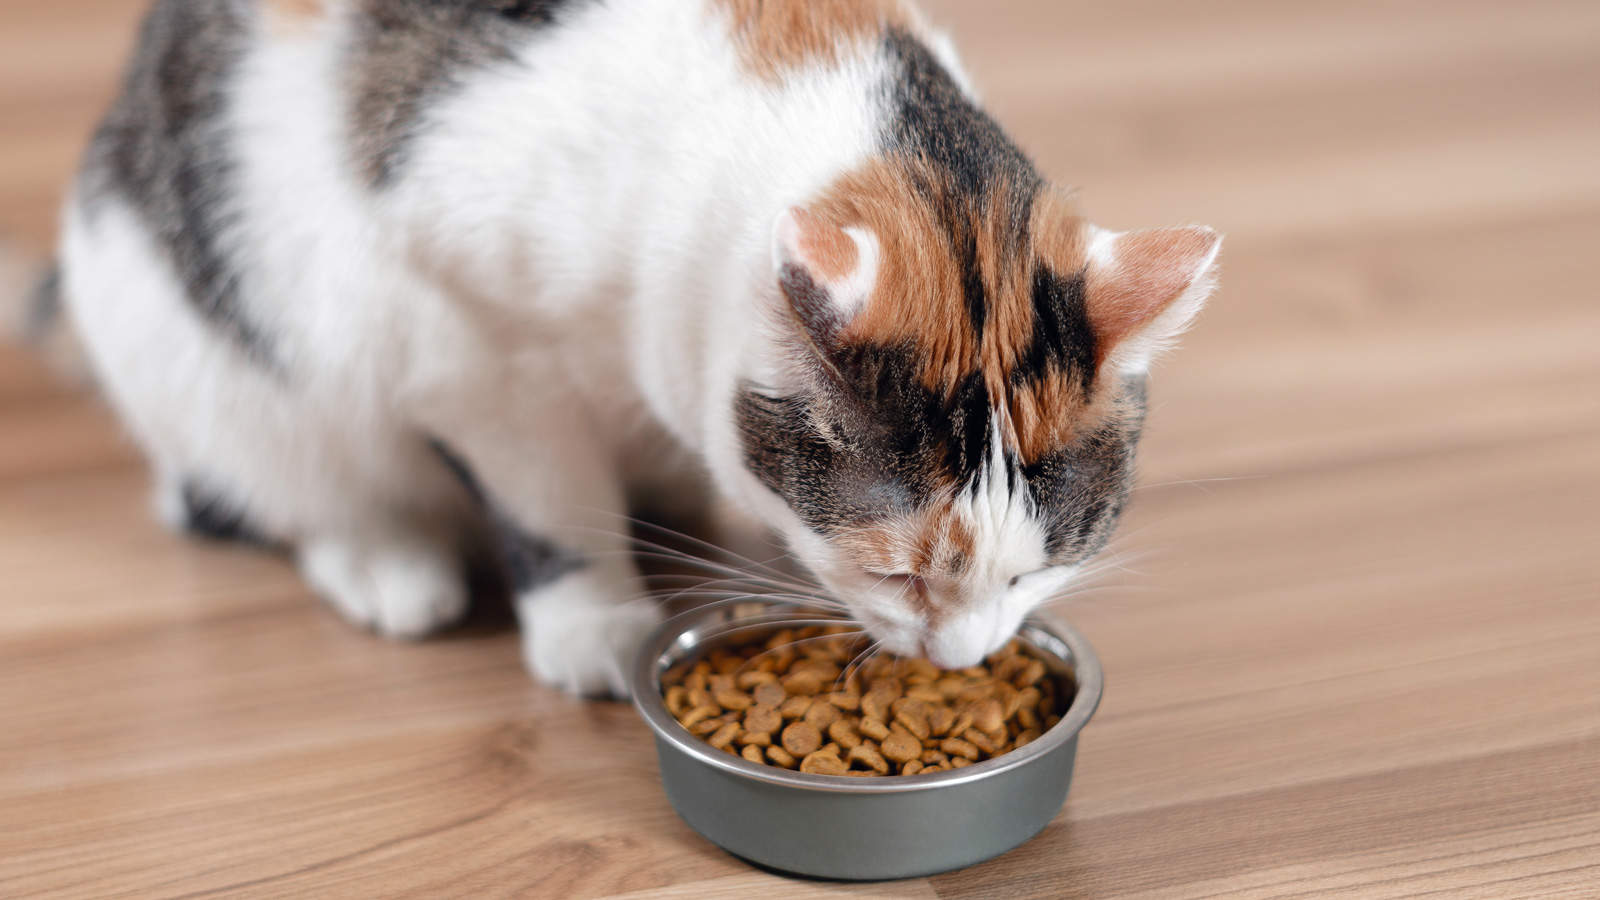 Cat eats from a bowl of dry food.